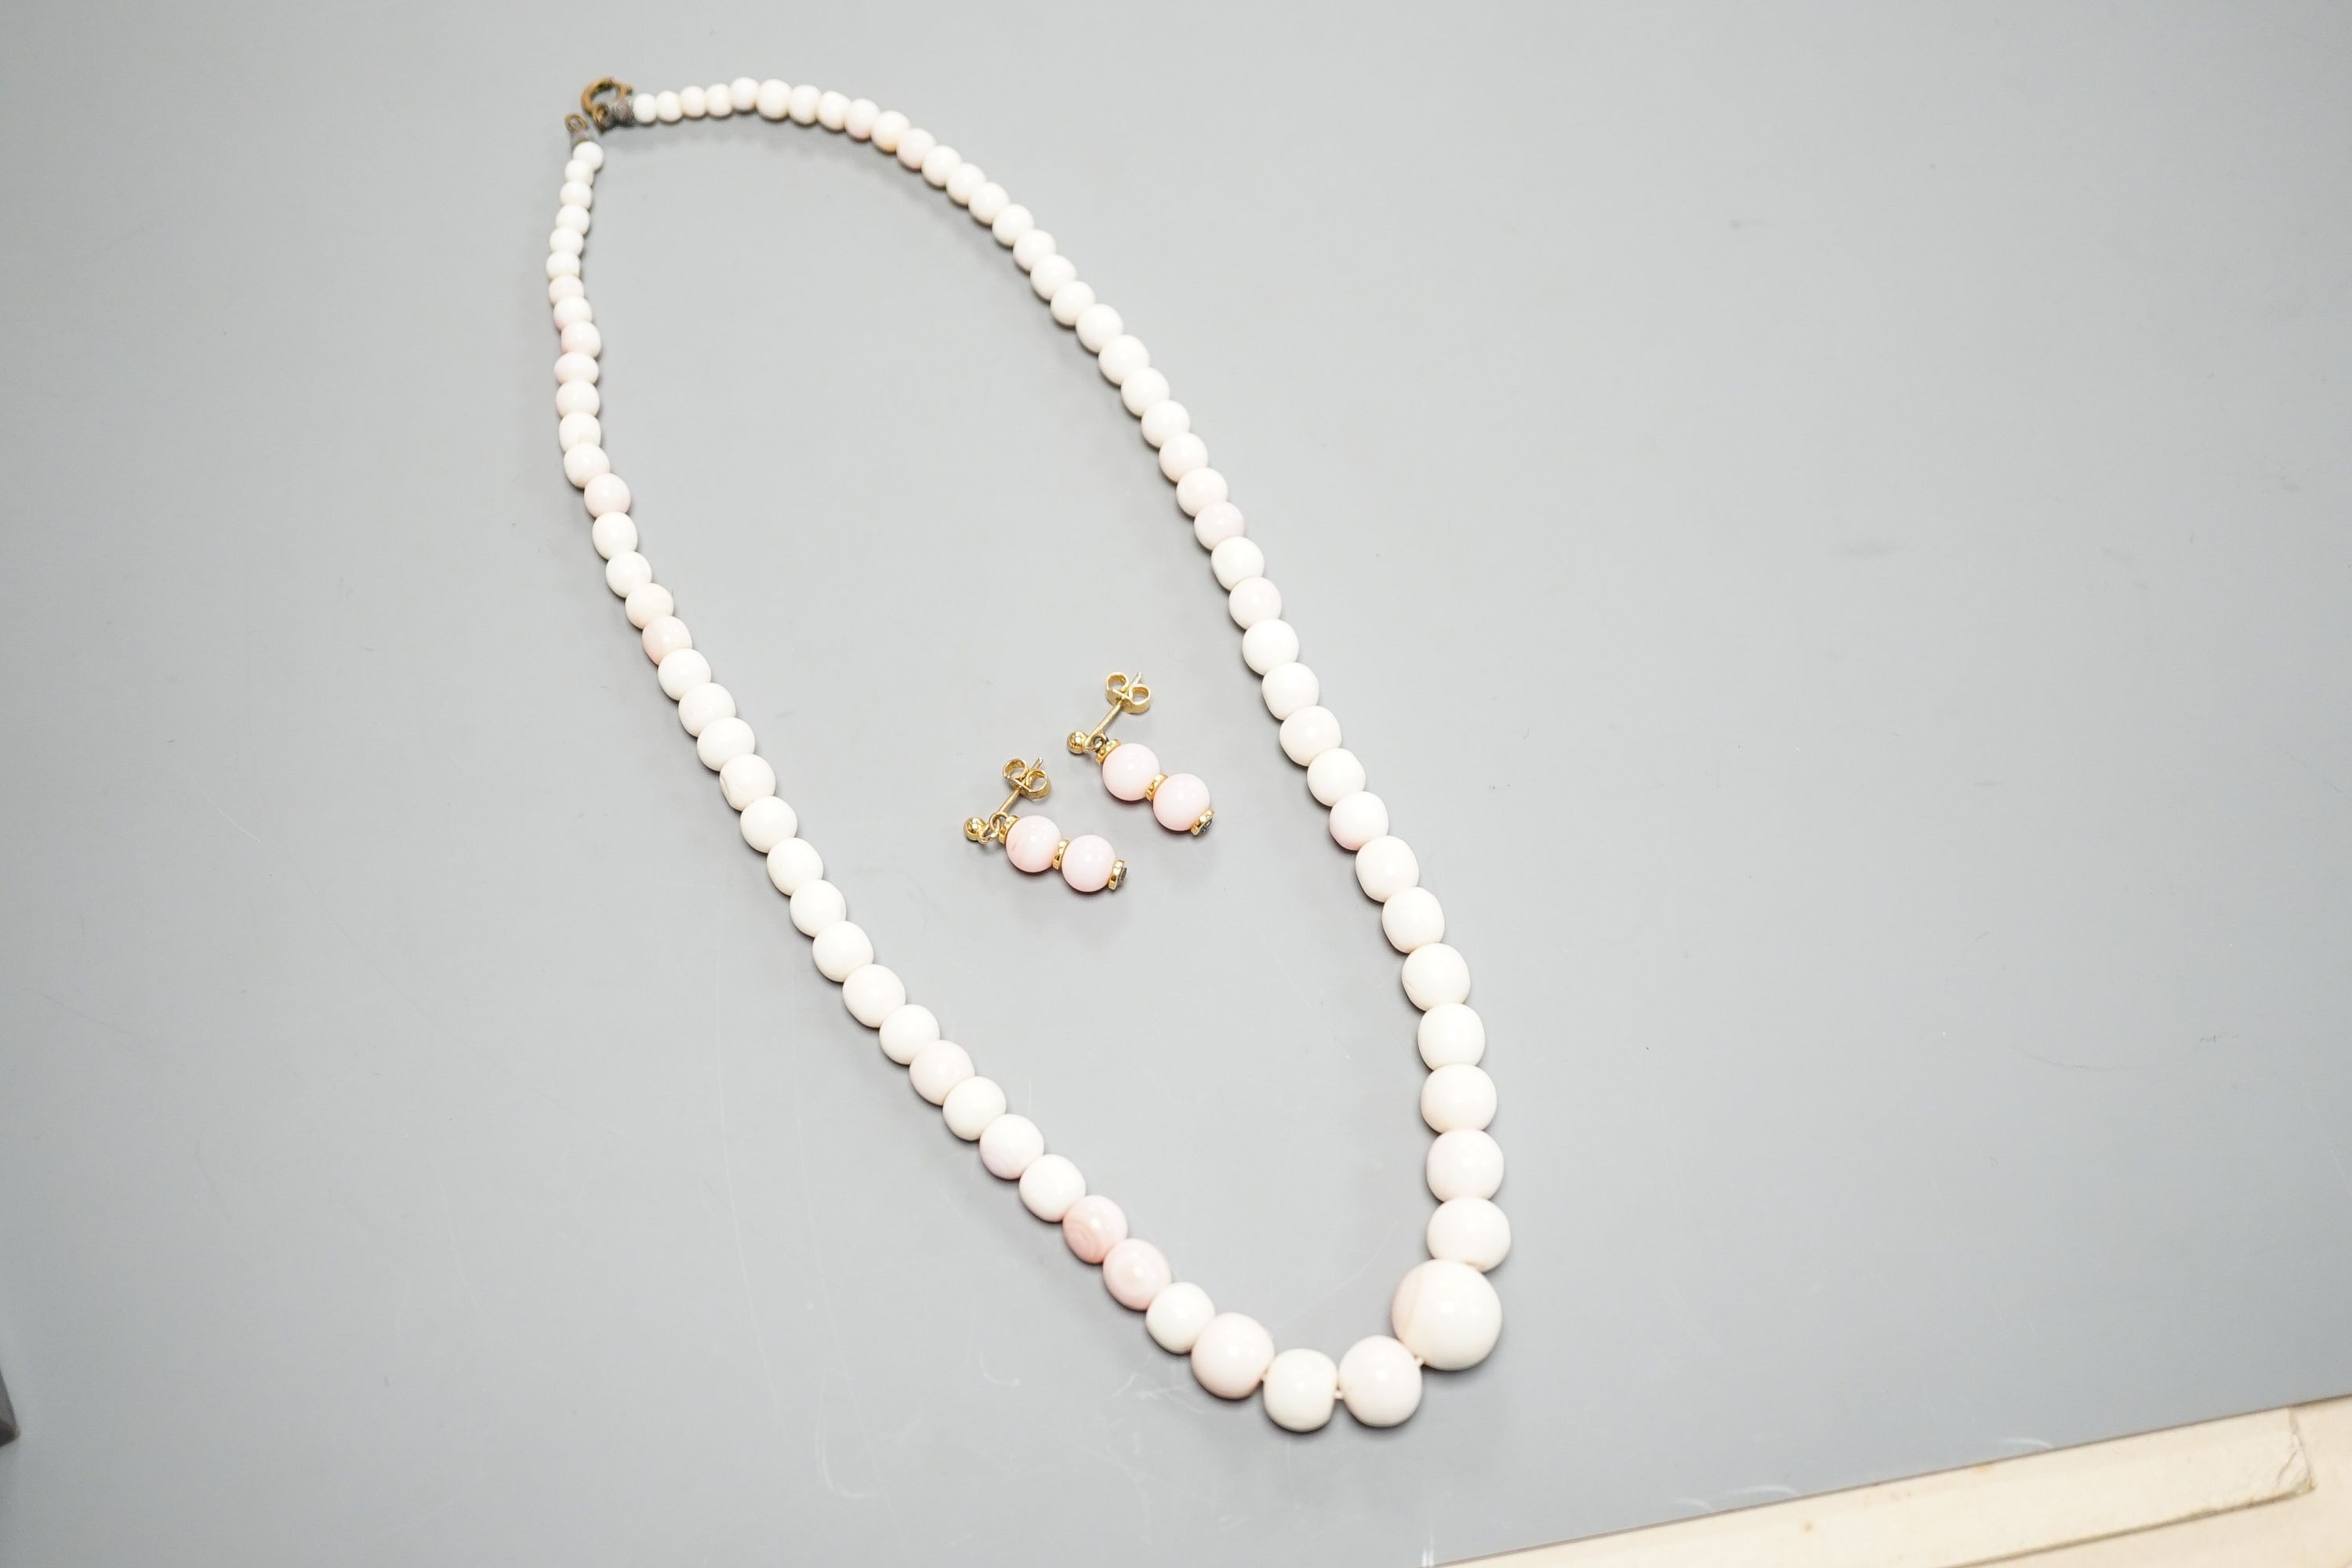 A single strand graduated bleached coral bead necklace, 51cm, gross 43.5 grams and a pair of 750 yellow metal and bleached coral earrings, 24mm, gross 4 grams.